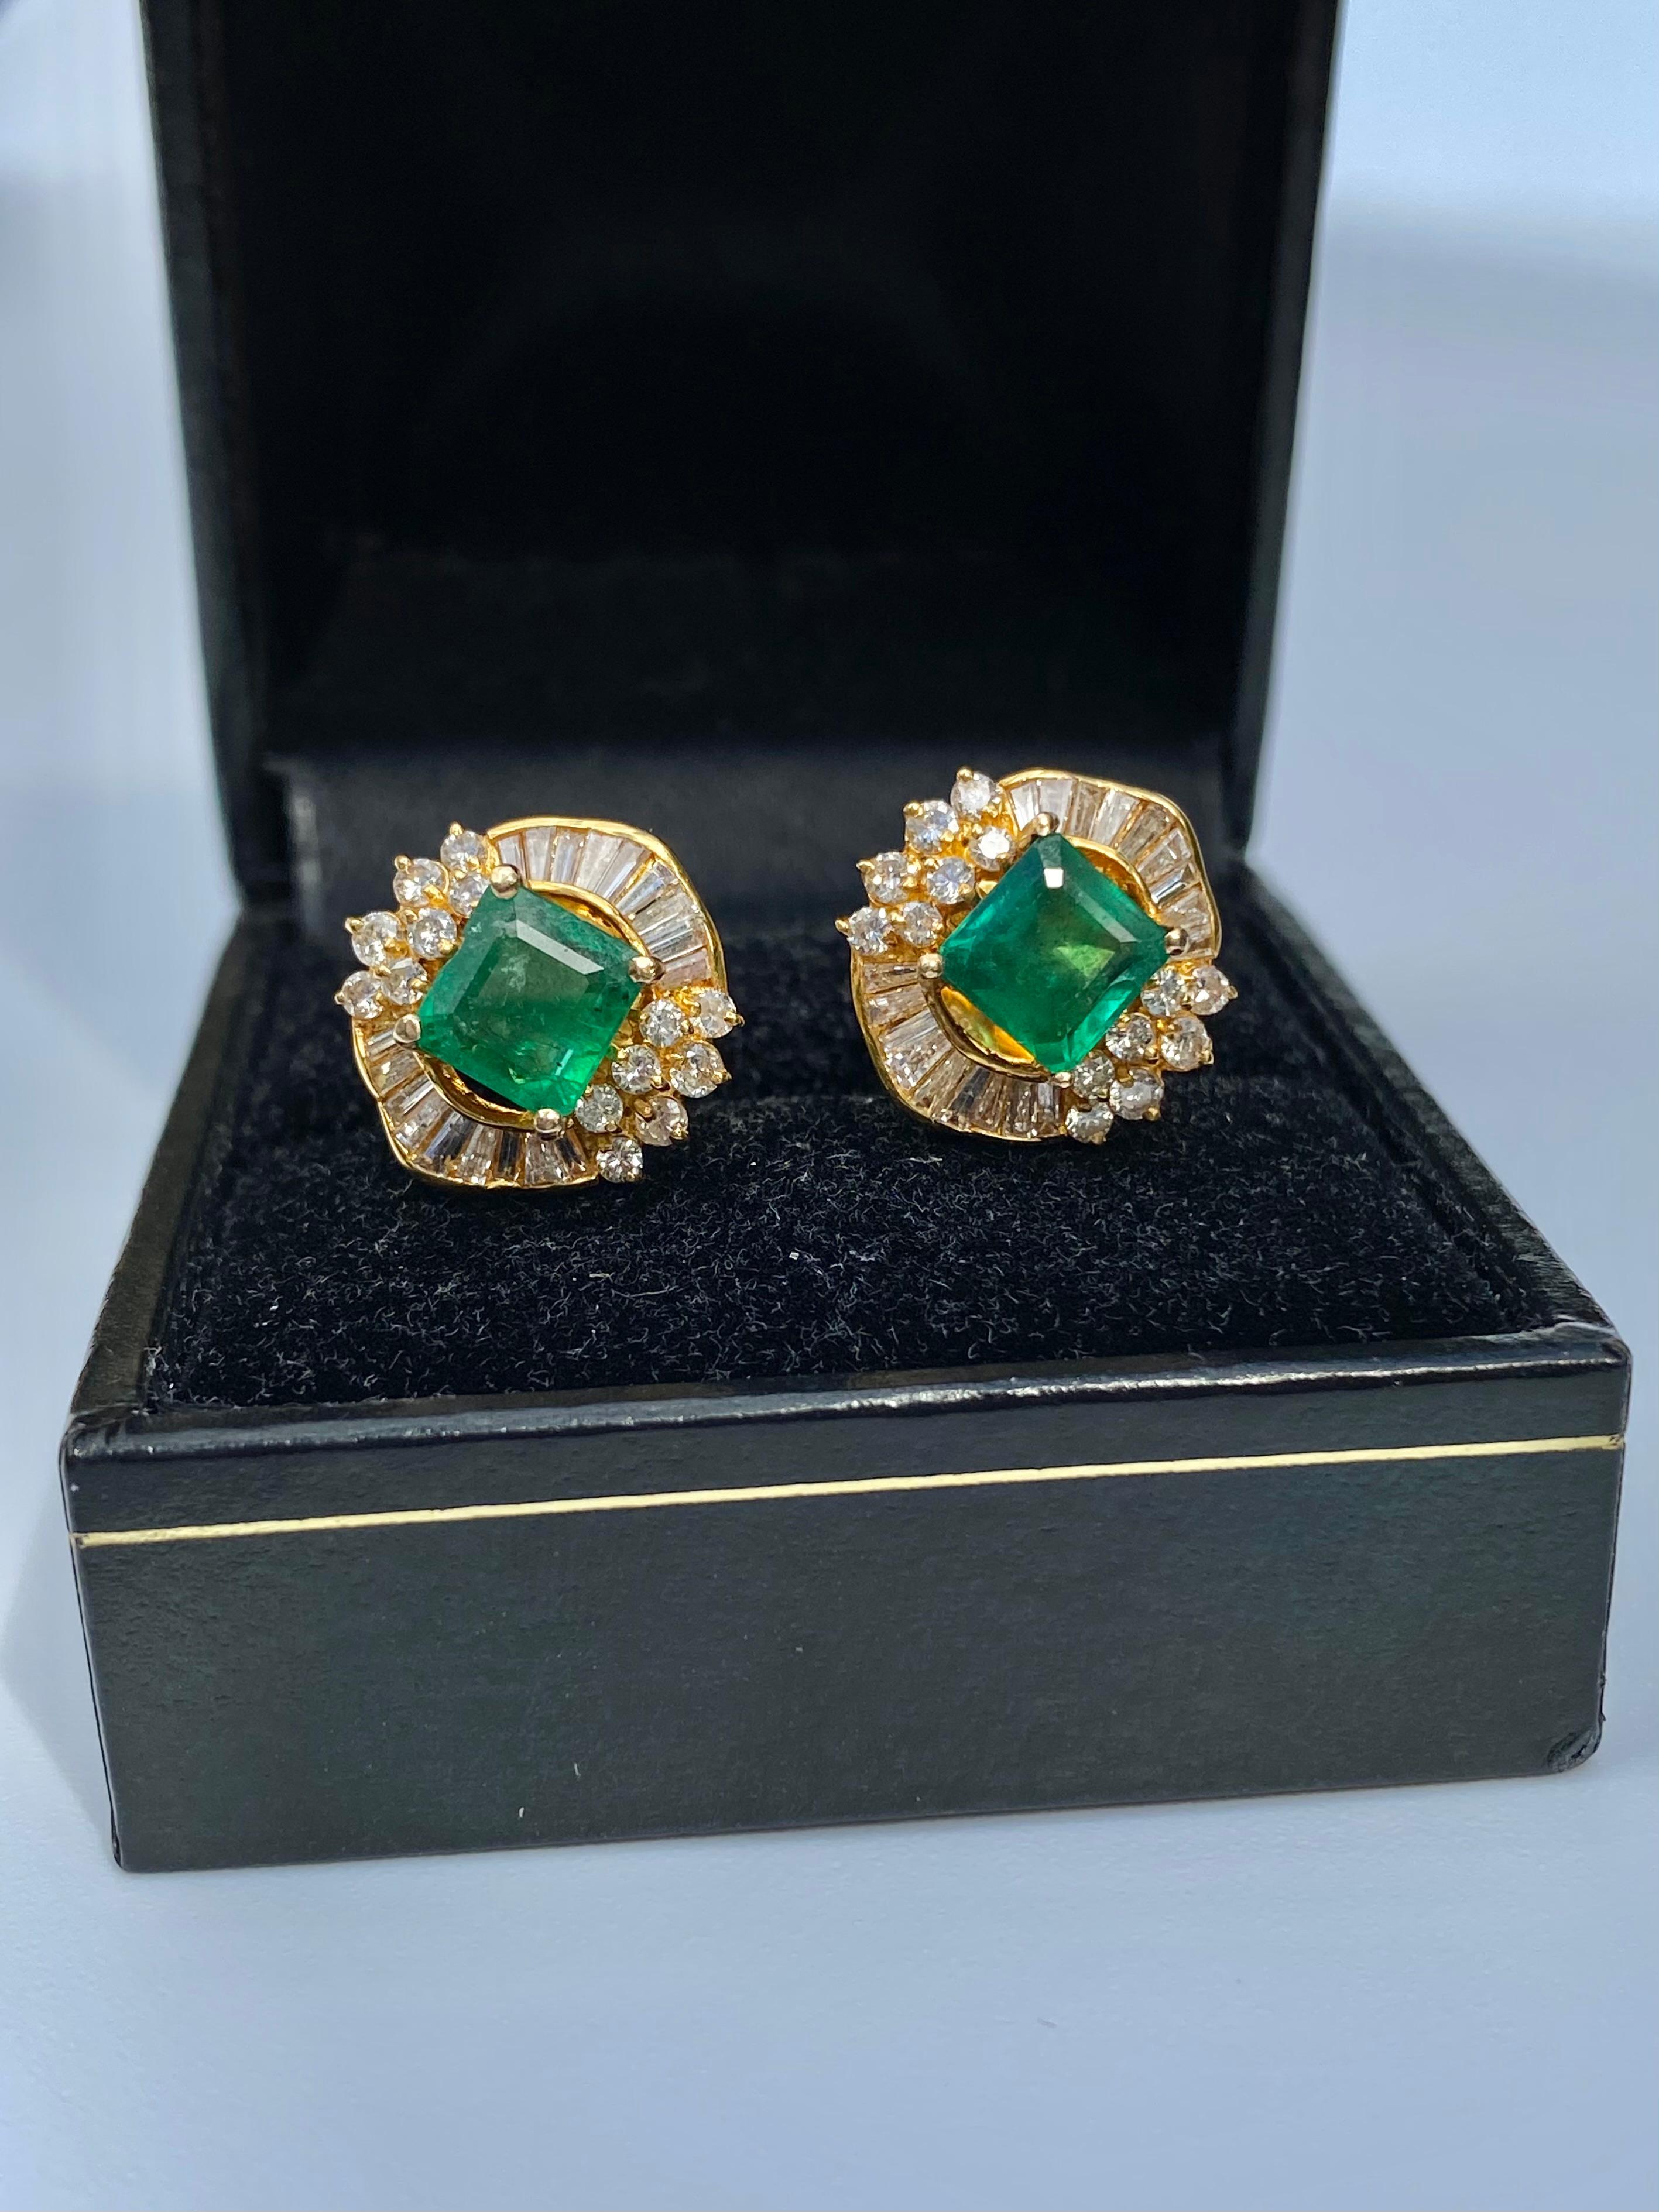 7.41 Carat Colombian Emerald and Diamond Pendant, Earring and Ring 18K Gold Set For Sale 3